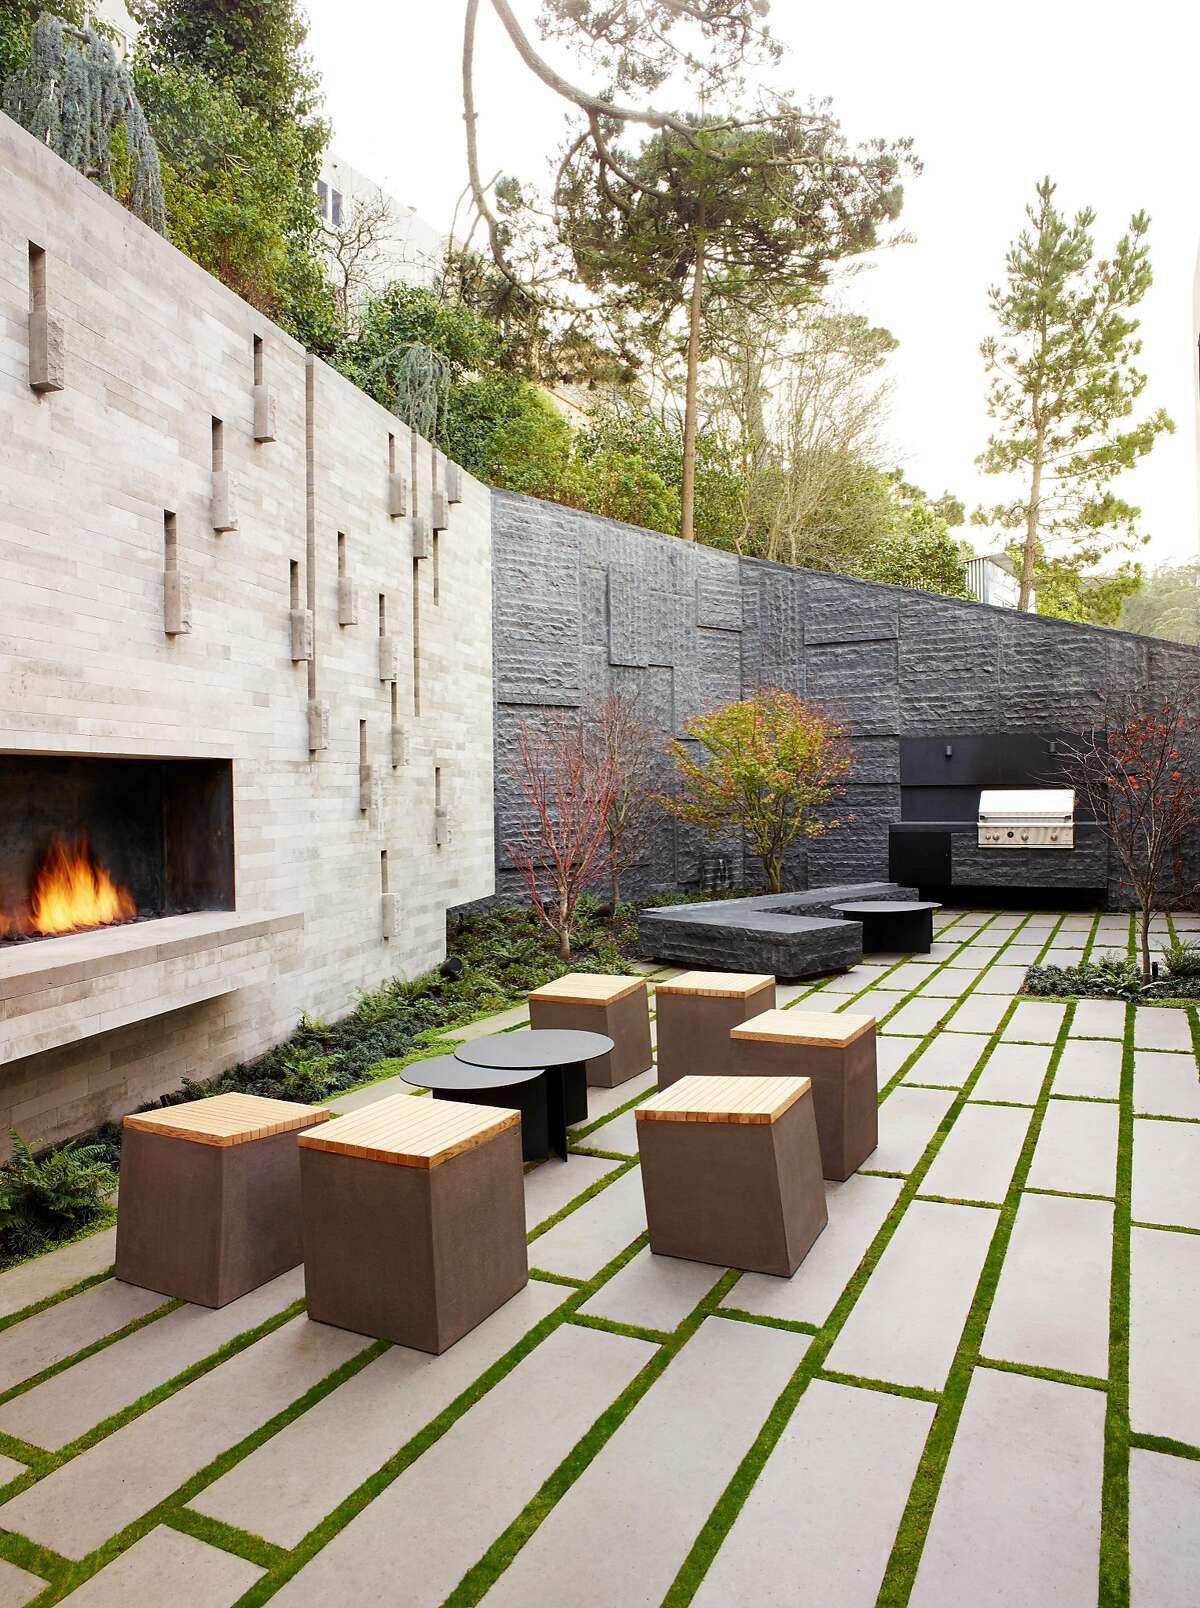 Inspired by the sculpture garden at the Hirschhorn Museum in Washington DC, landscape architects James Lord and Roderick Wyllie of Surface Design remade Abdur and Ana Chowbury's Cole Valley home into a climber's paradise with its scalable garden walls.